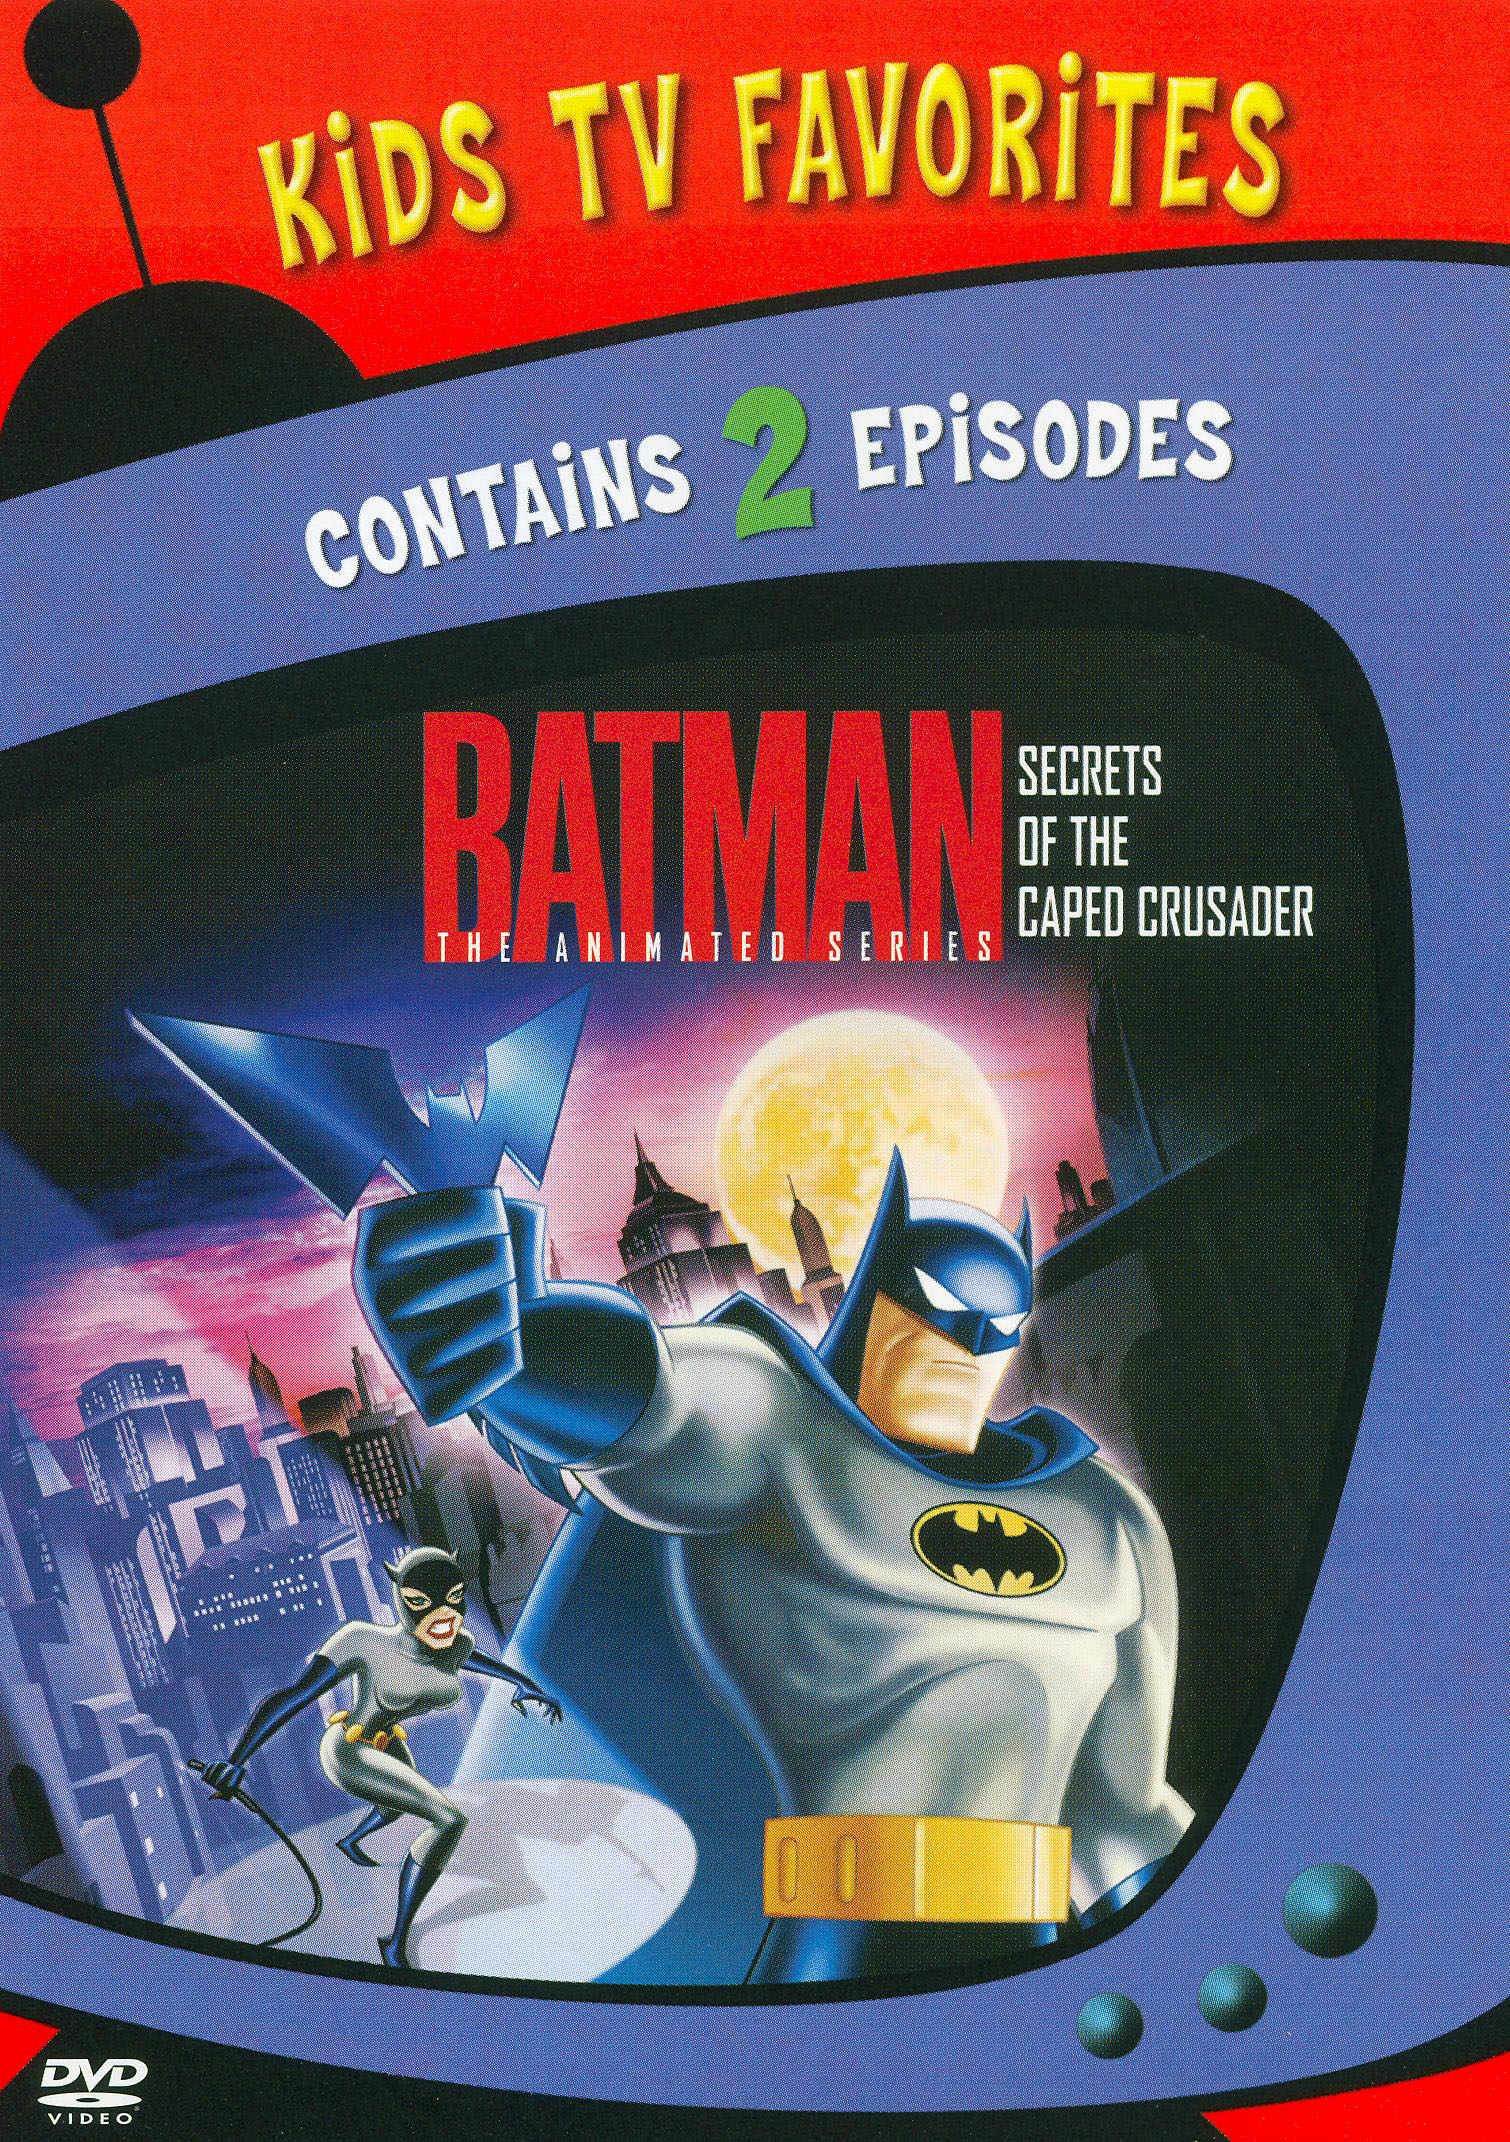 Batman: The Animated Series Secrets of the Caped Crusader #1 - Best Buy